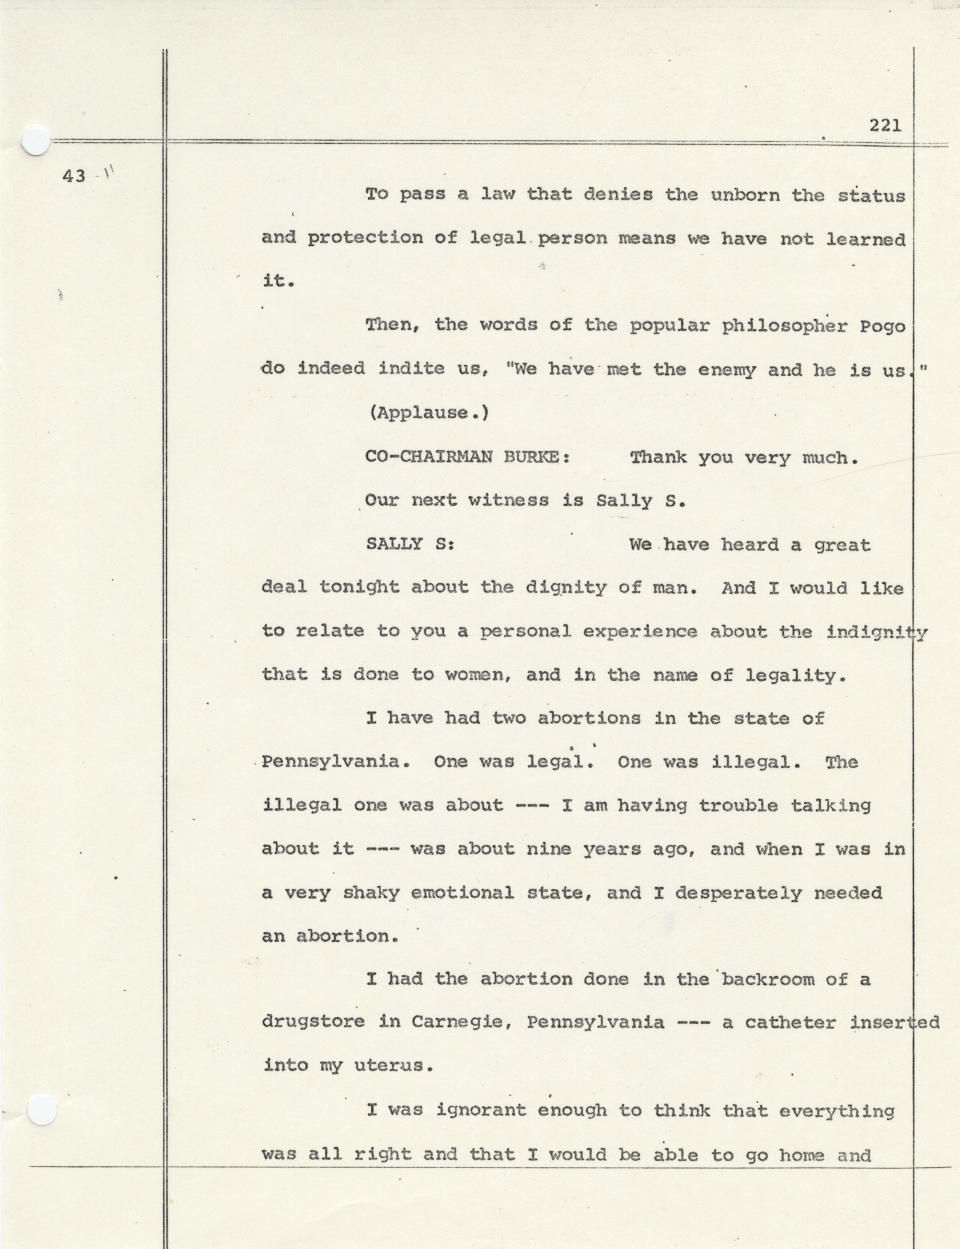 Transcript of Sally S.'s testimony delivered at the Pennsylvania Abortion Law Commission meeting in Pittsburgh, March 14, 1972.